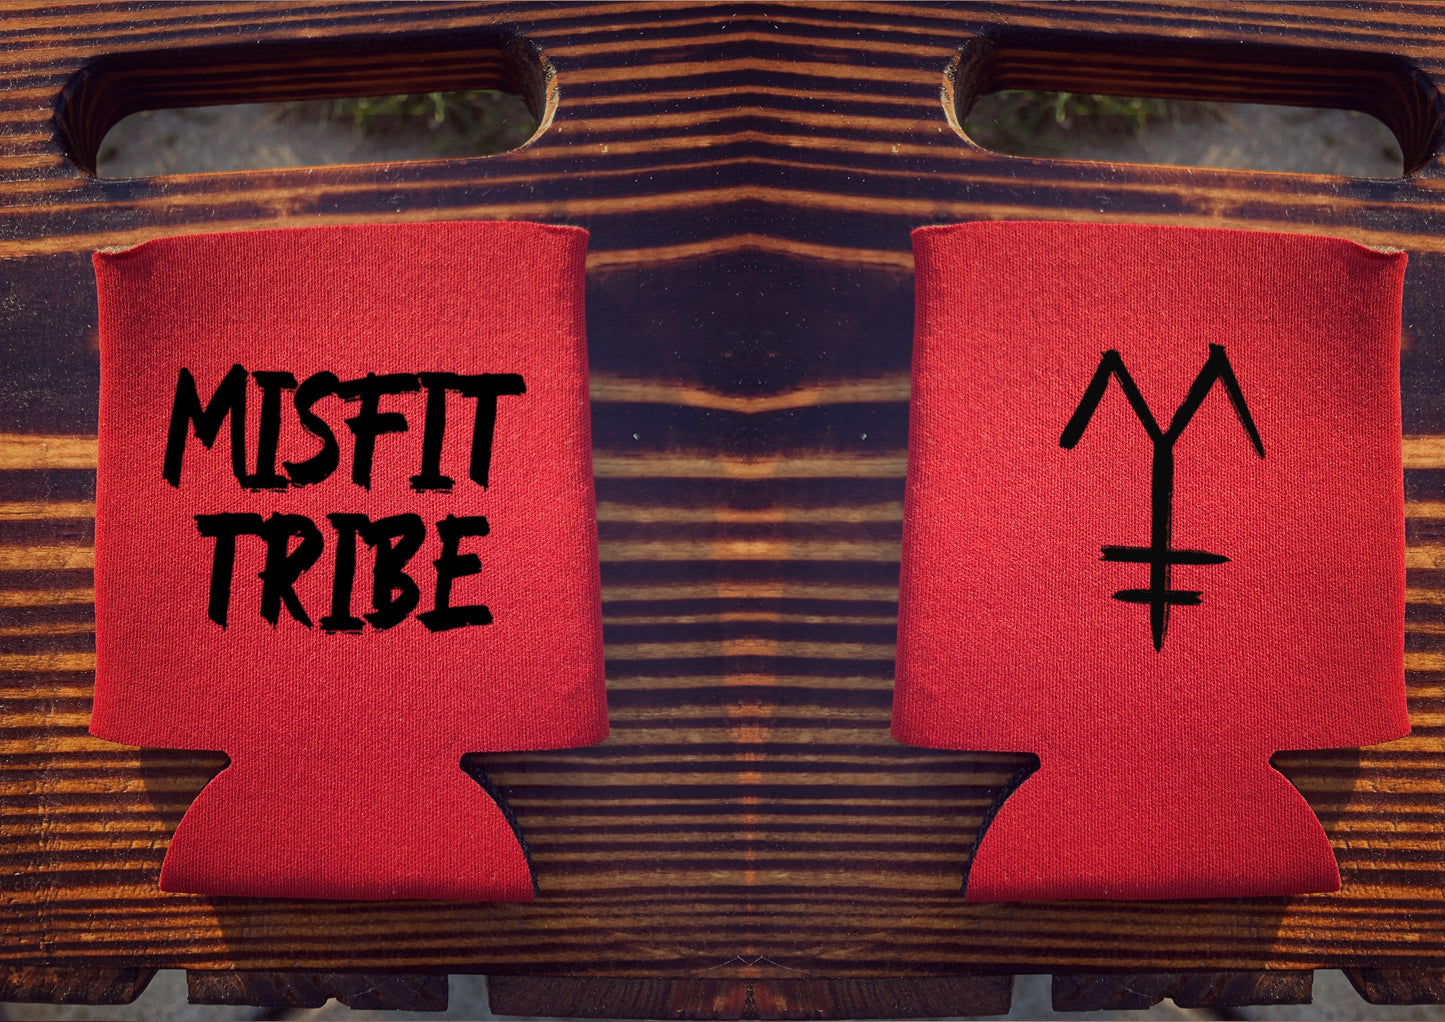 MISFIT TRIBE Can Cooler